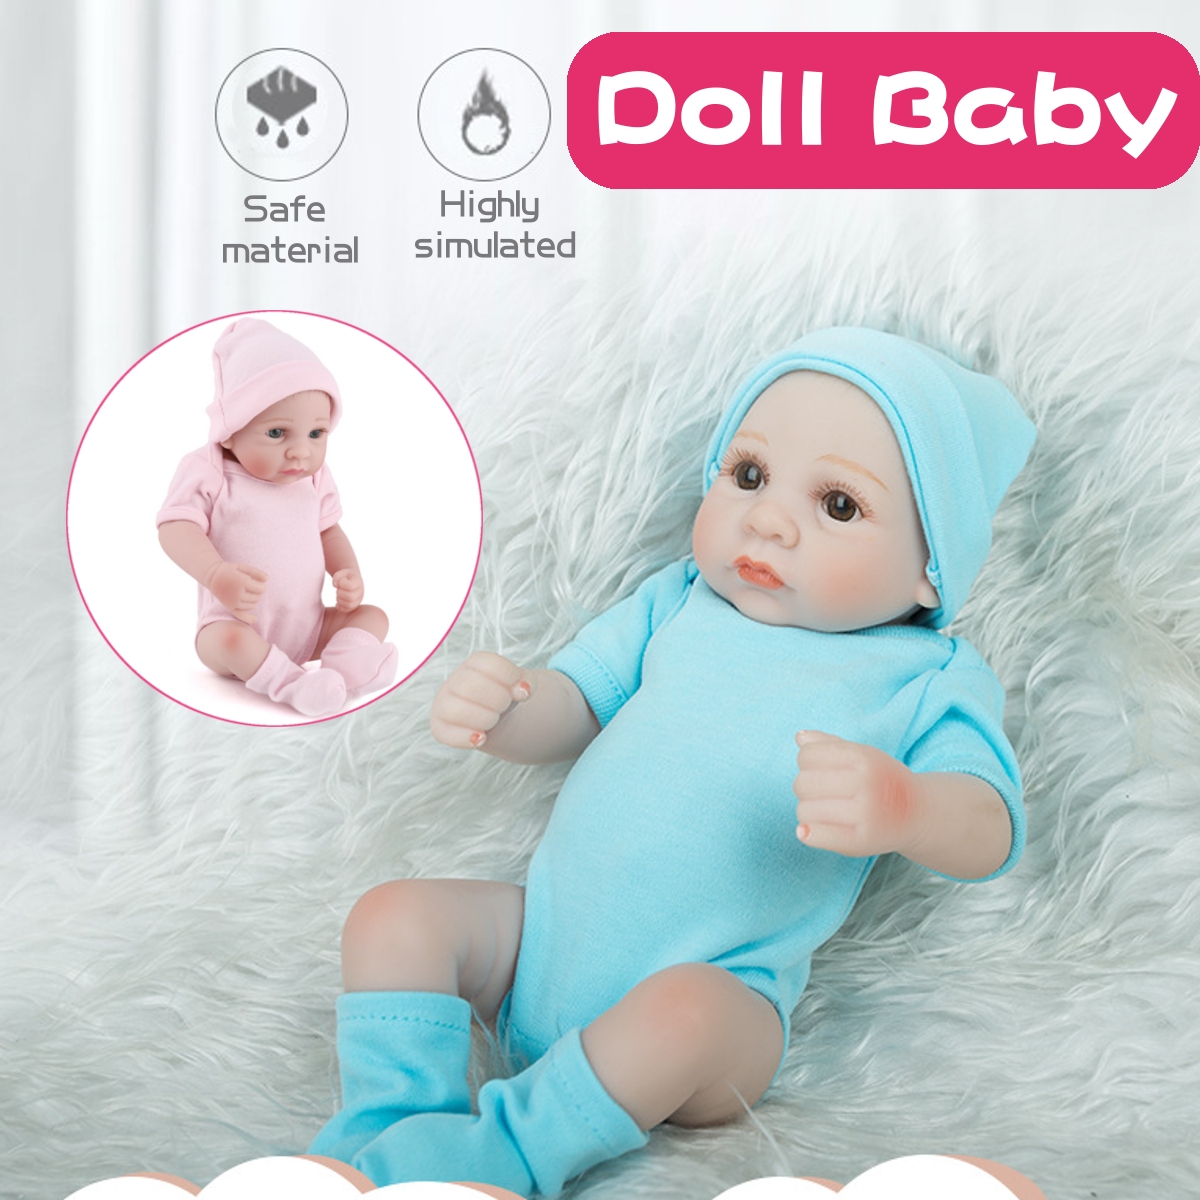 28CM Soft Silicone Realistic Sleeping Reborn Lifelike Newborn Baby Doll Toy with Moveable Head Arms And Legs